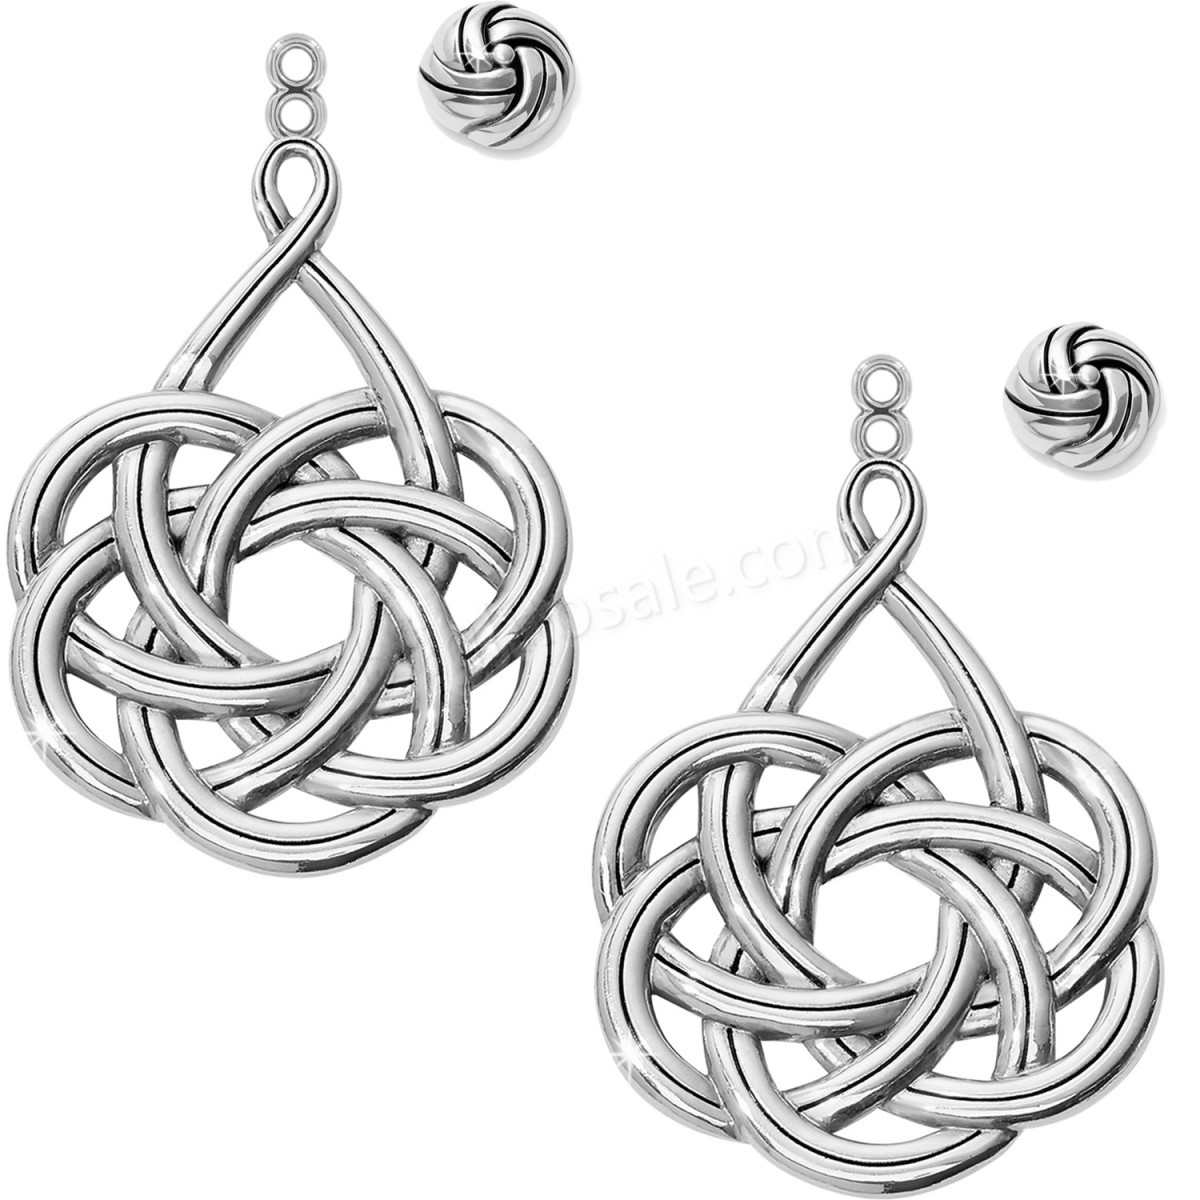 Brighton Collectibles & Online Discount Moderna Post Drop Earrings - -1